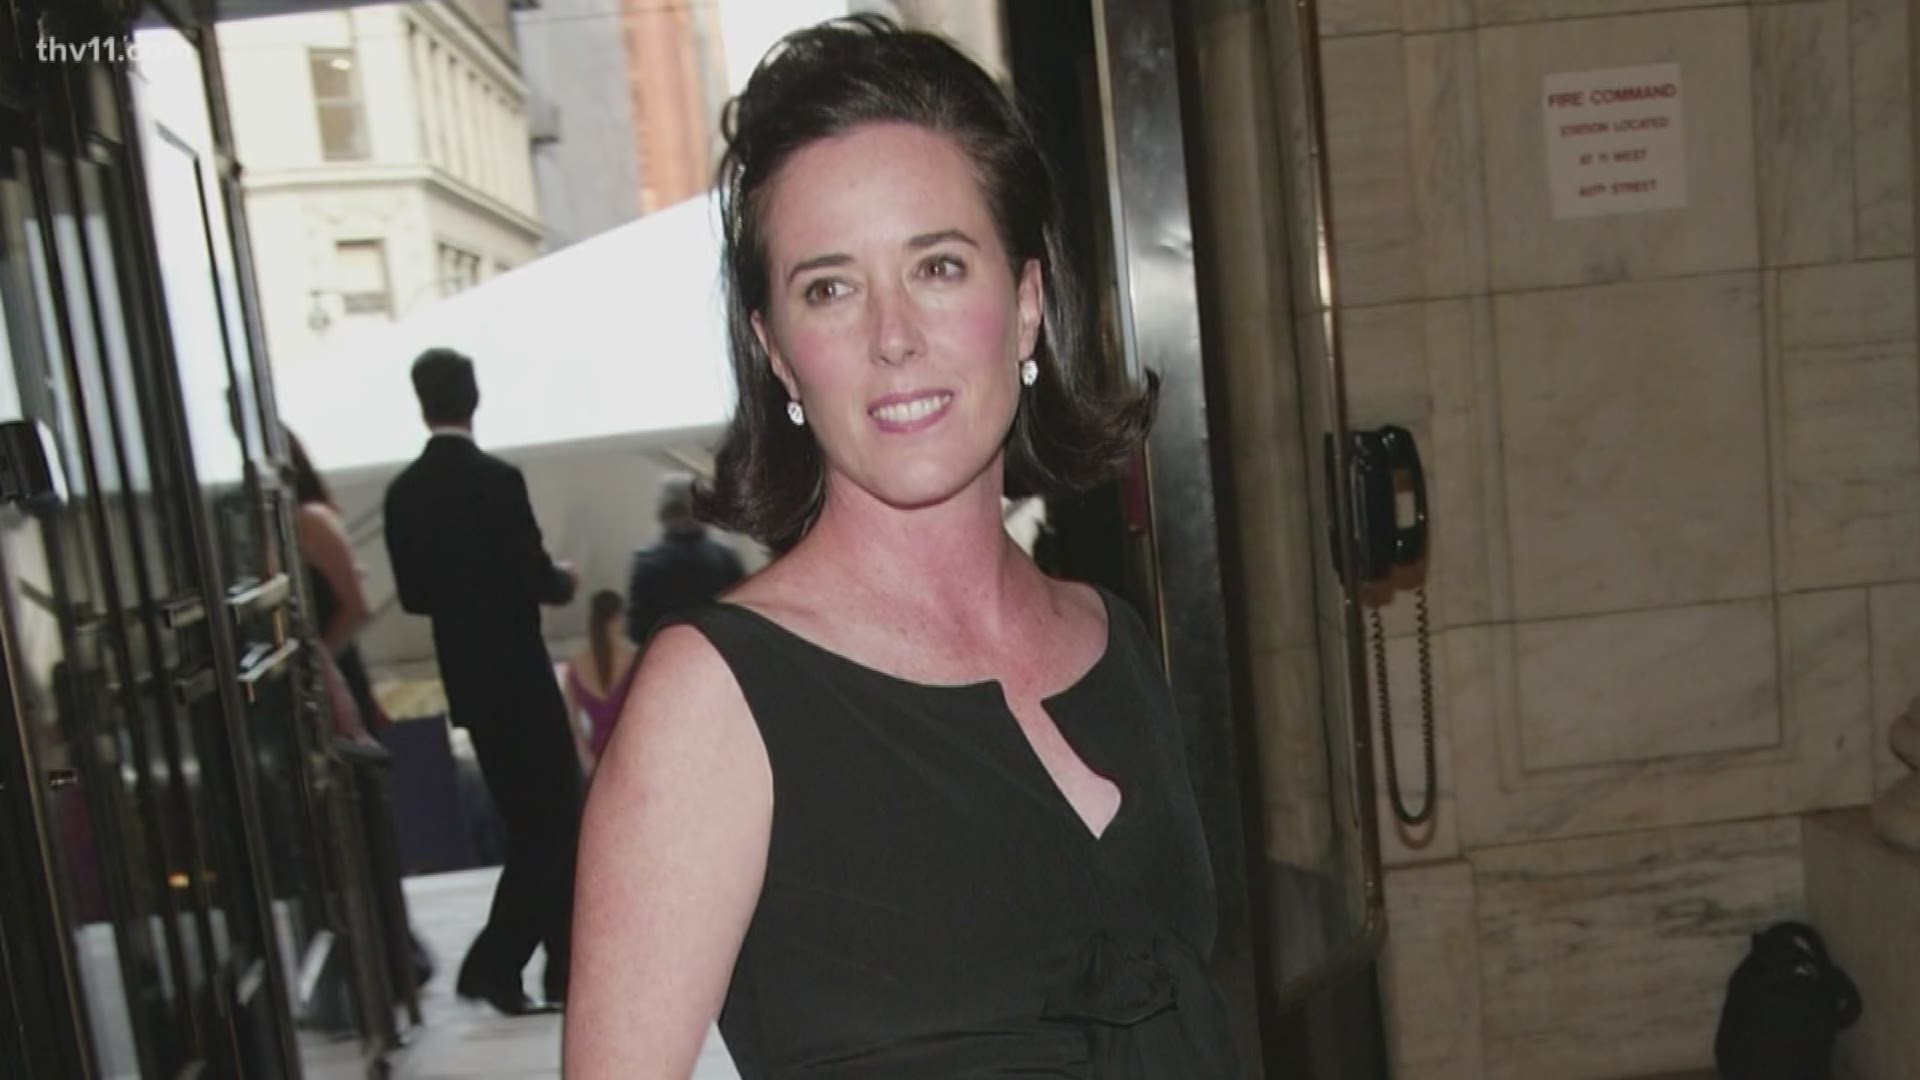 Kate Spade apparent suicide highlights need for mental health awareness,  discussion 